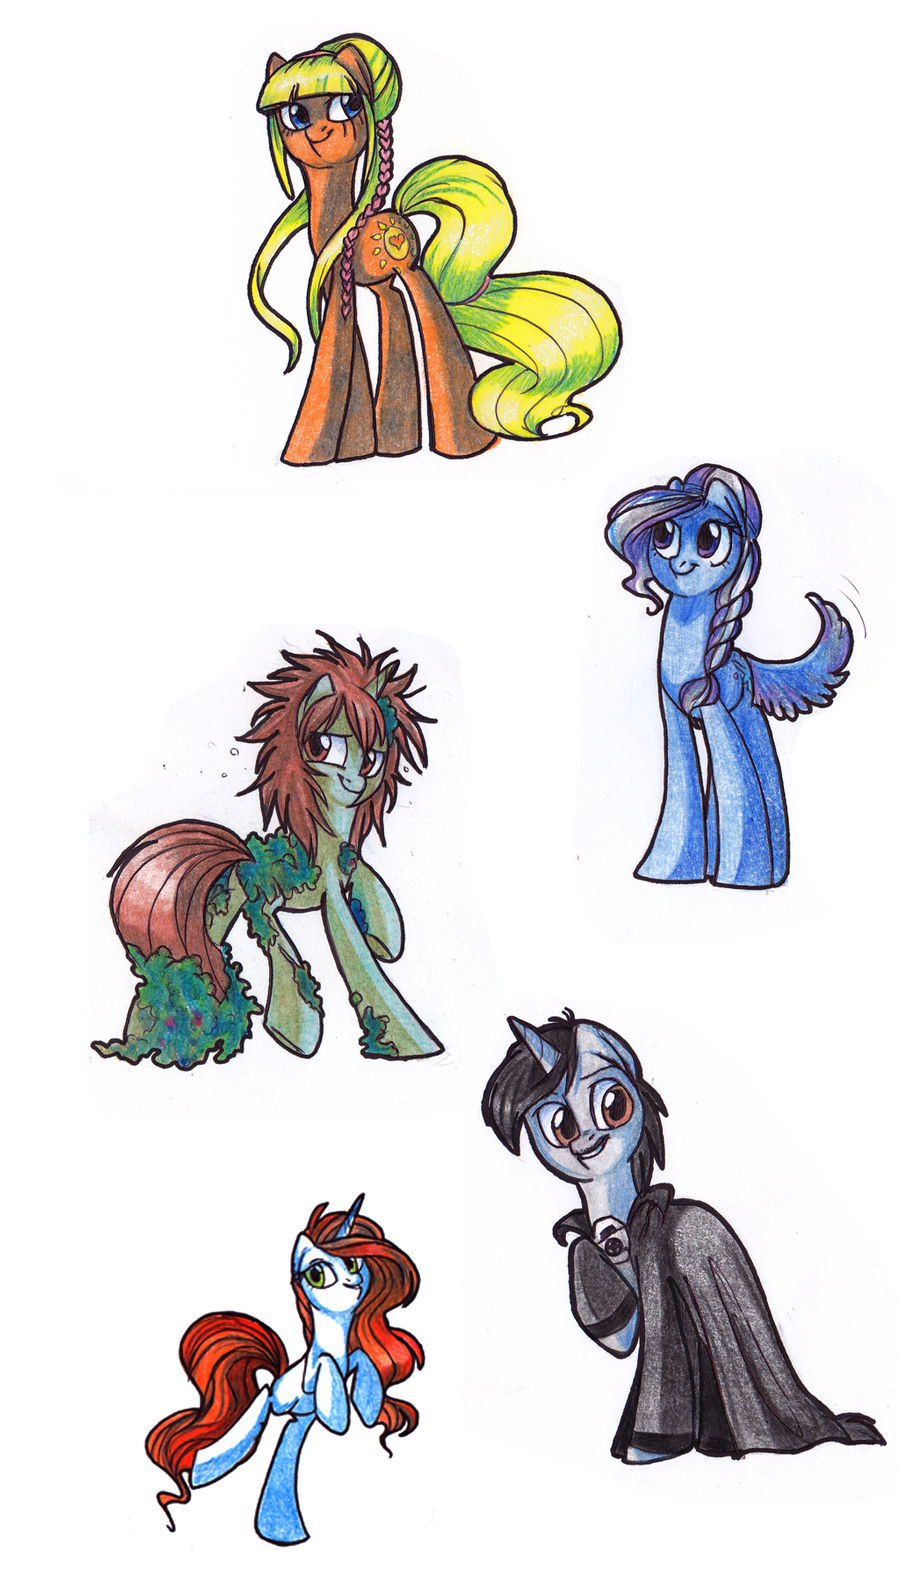 The most active ponies